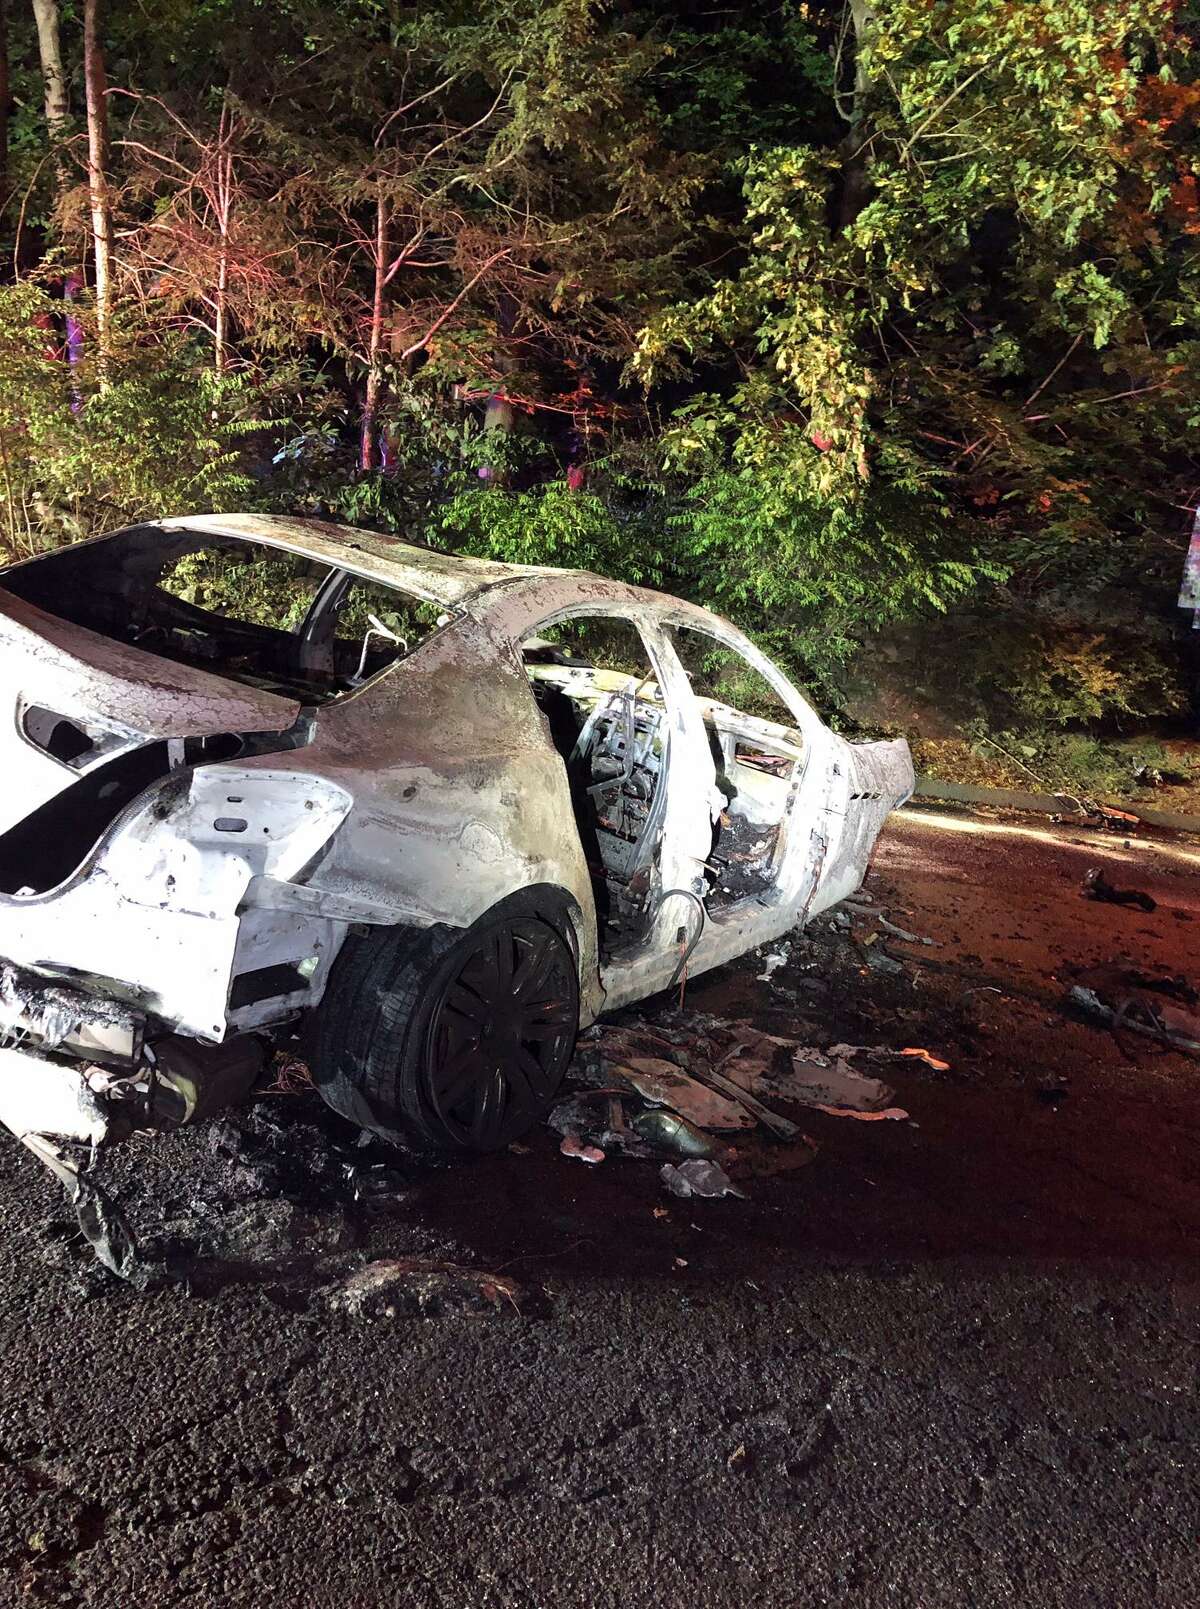 This 2016 Maserati Ghibli crashed Monday night on Westhill Road and burst into flames. The 22-year-old driver was taken to the Bridgeport Hospital Burn Unit and is in critical condition.